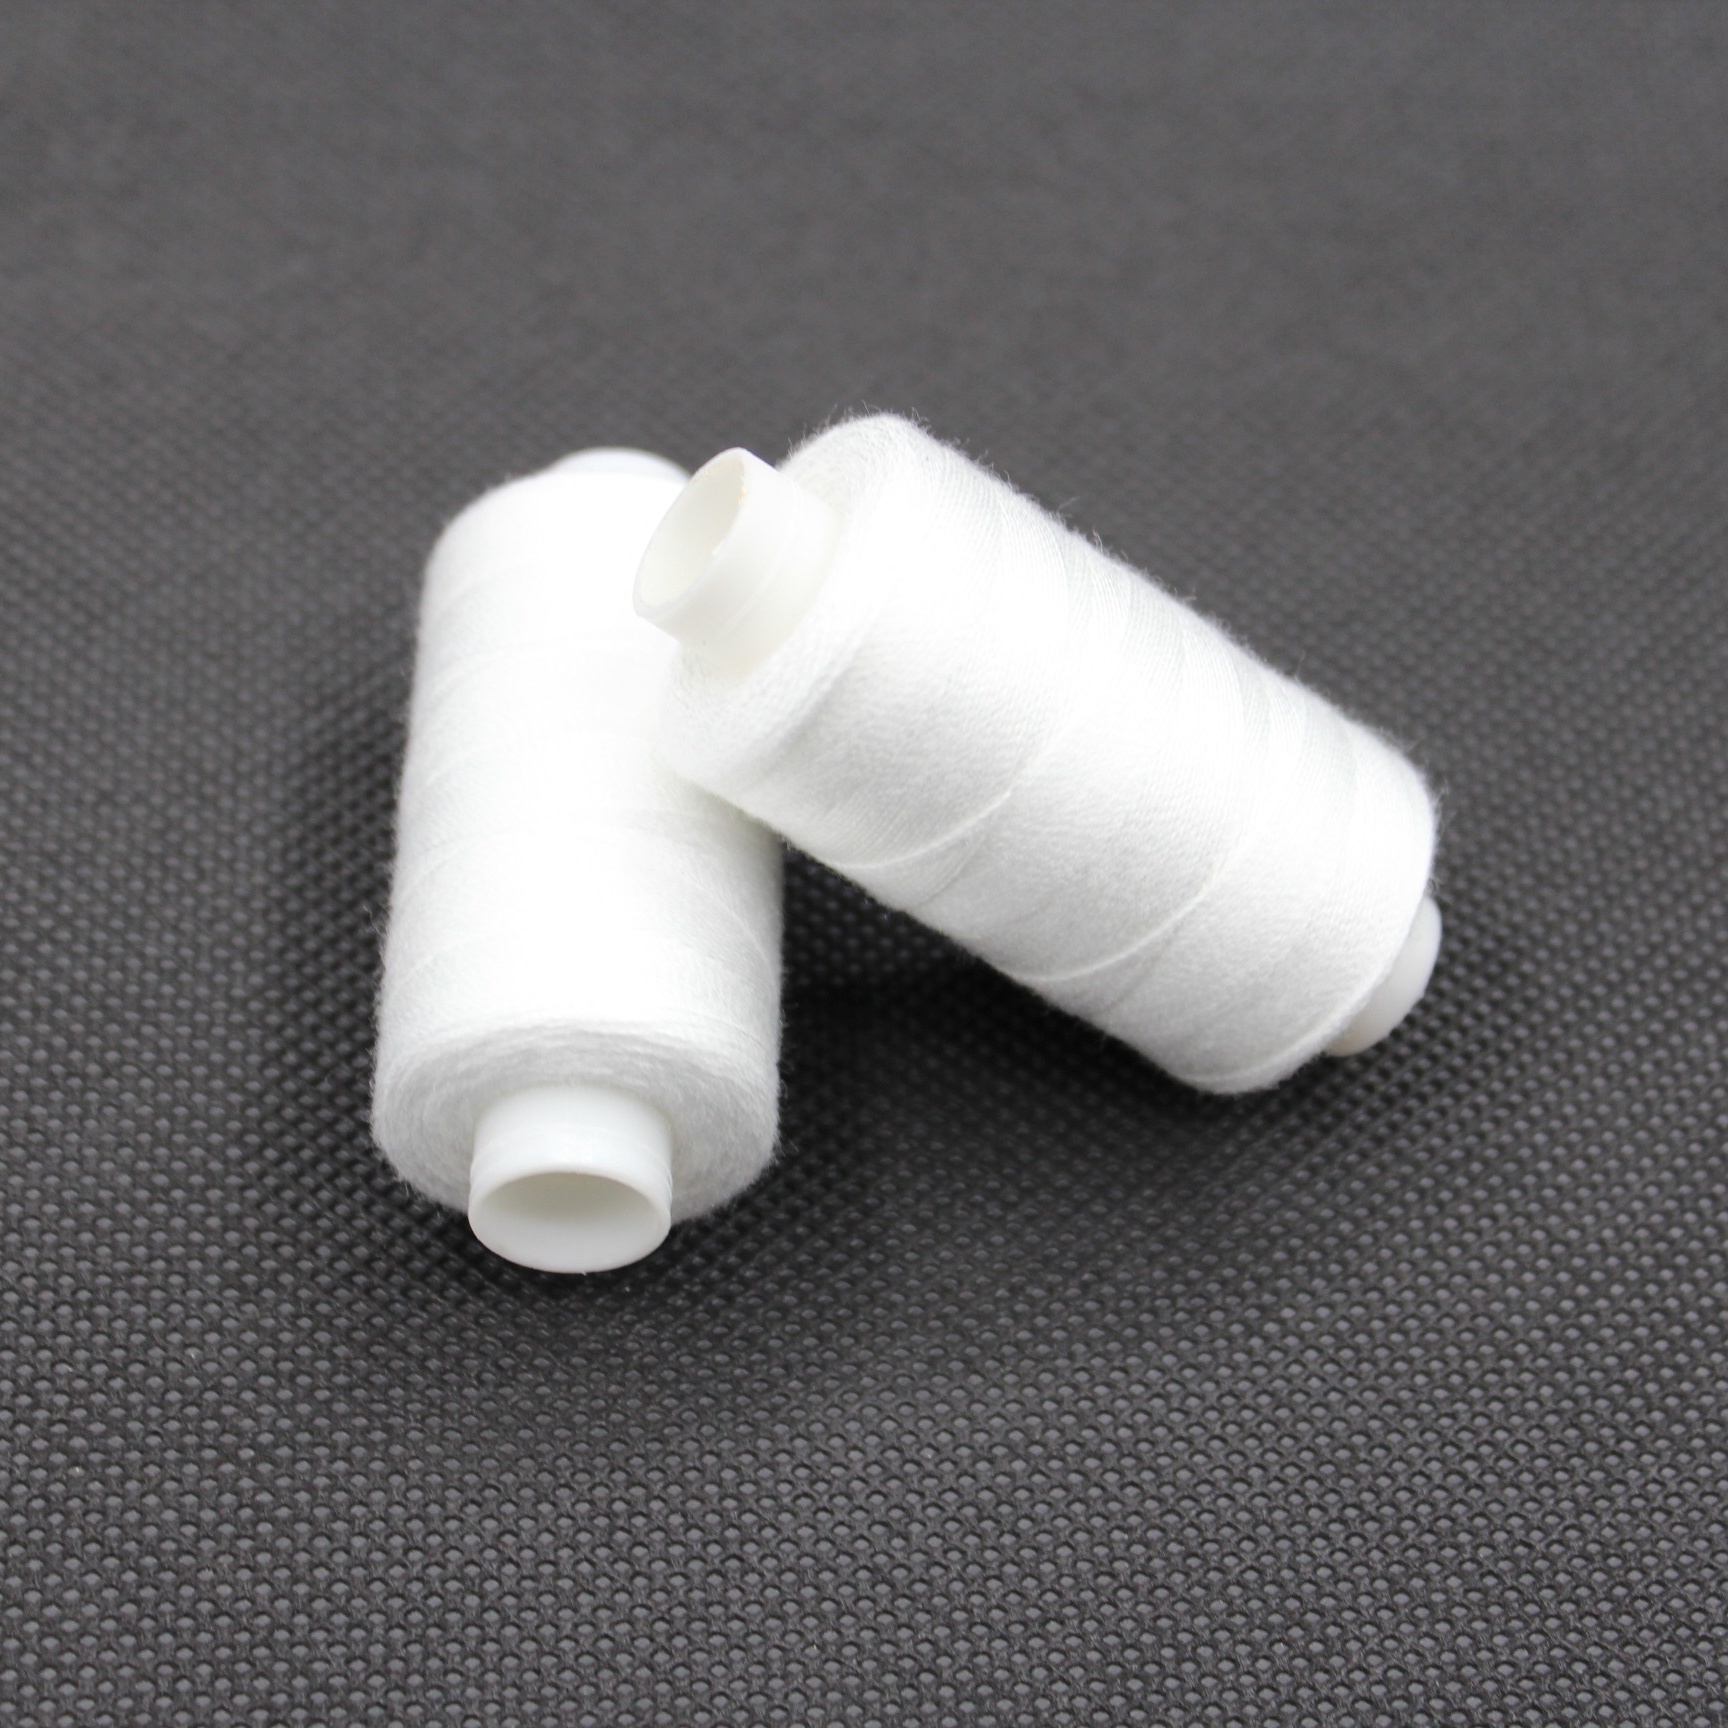 white Jeans coat bags thread real strong thick Sewing thread Spools thread